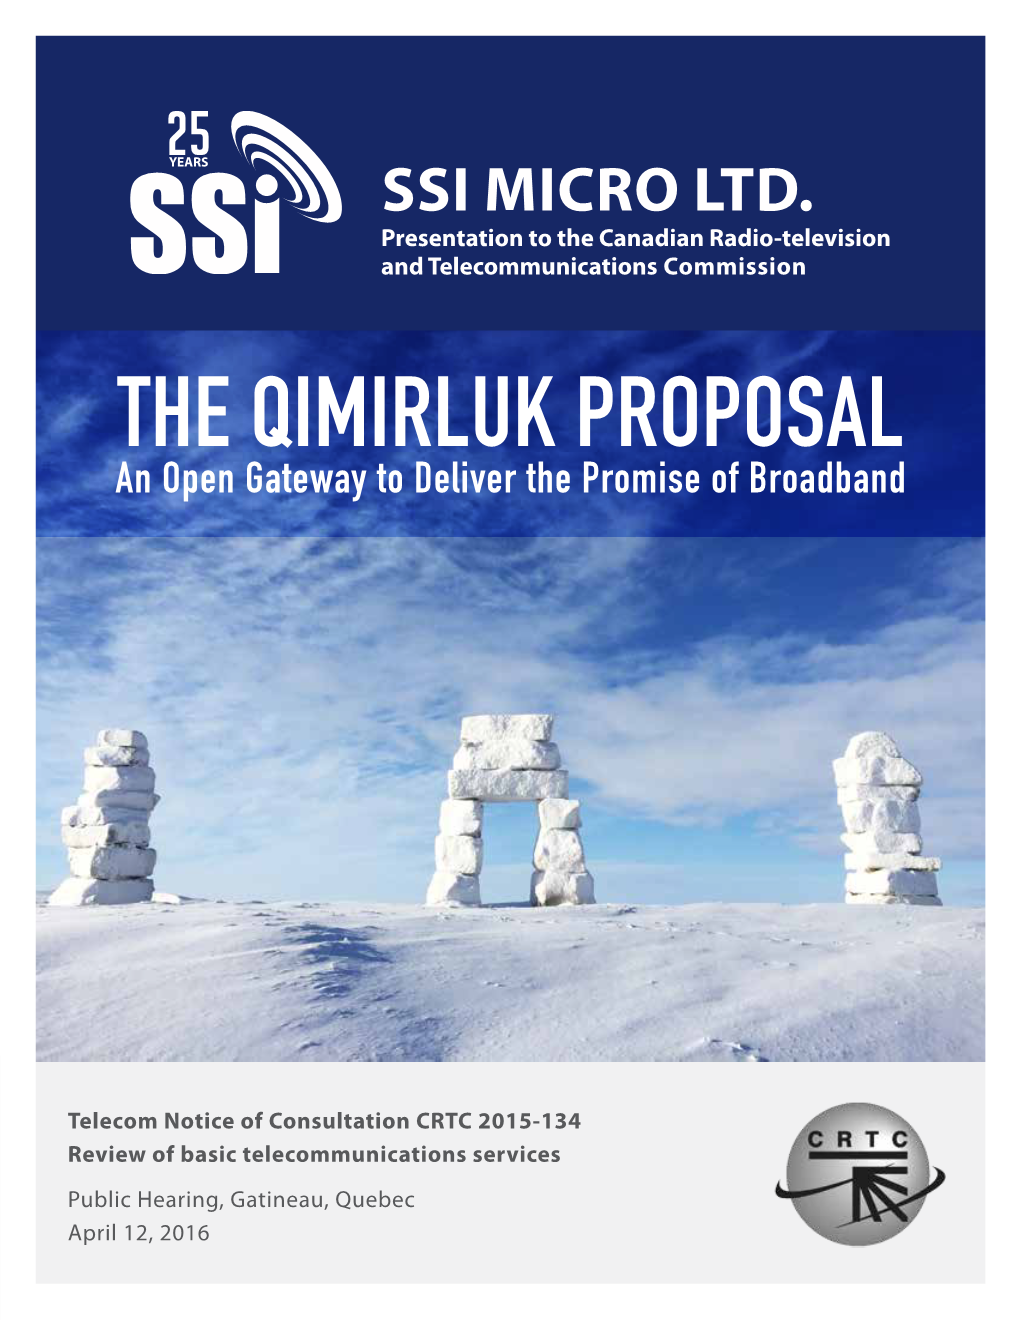 The Qimirluk Proposal an Open Gateway to Deliver the Promise of Broadband